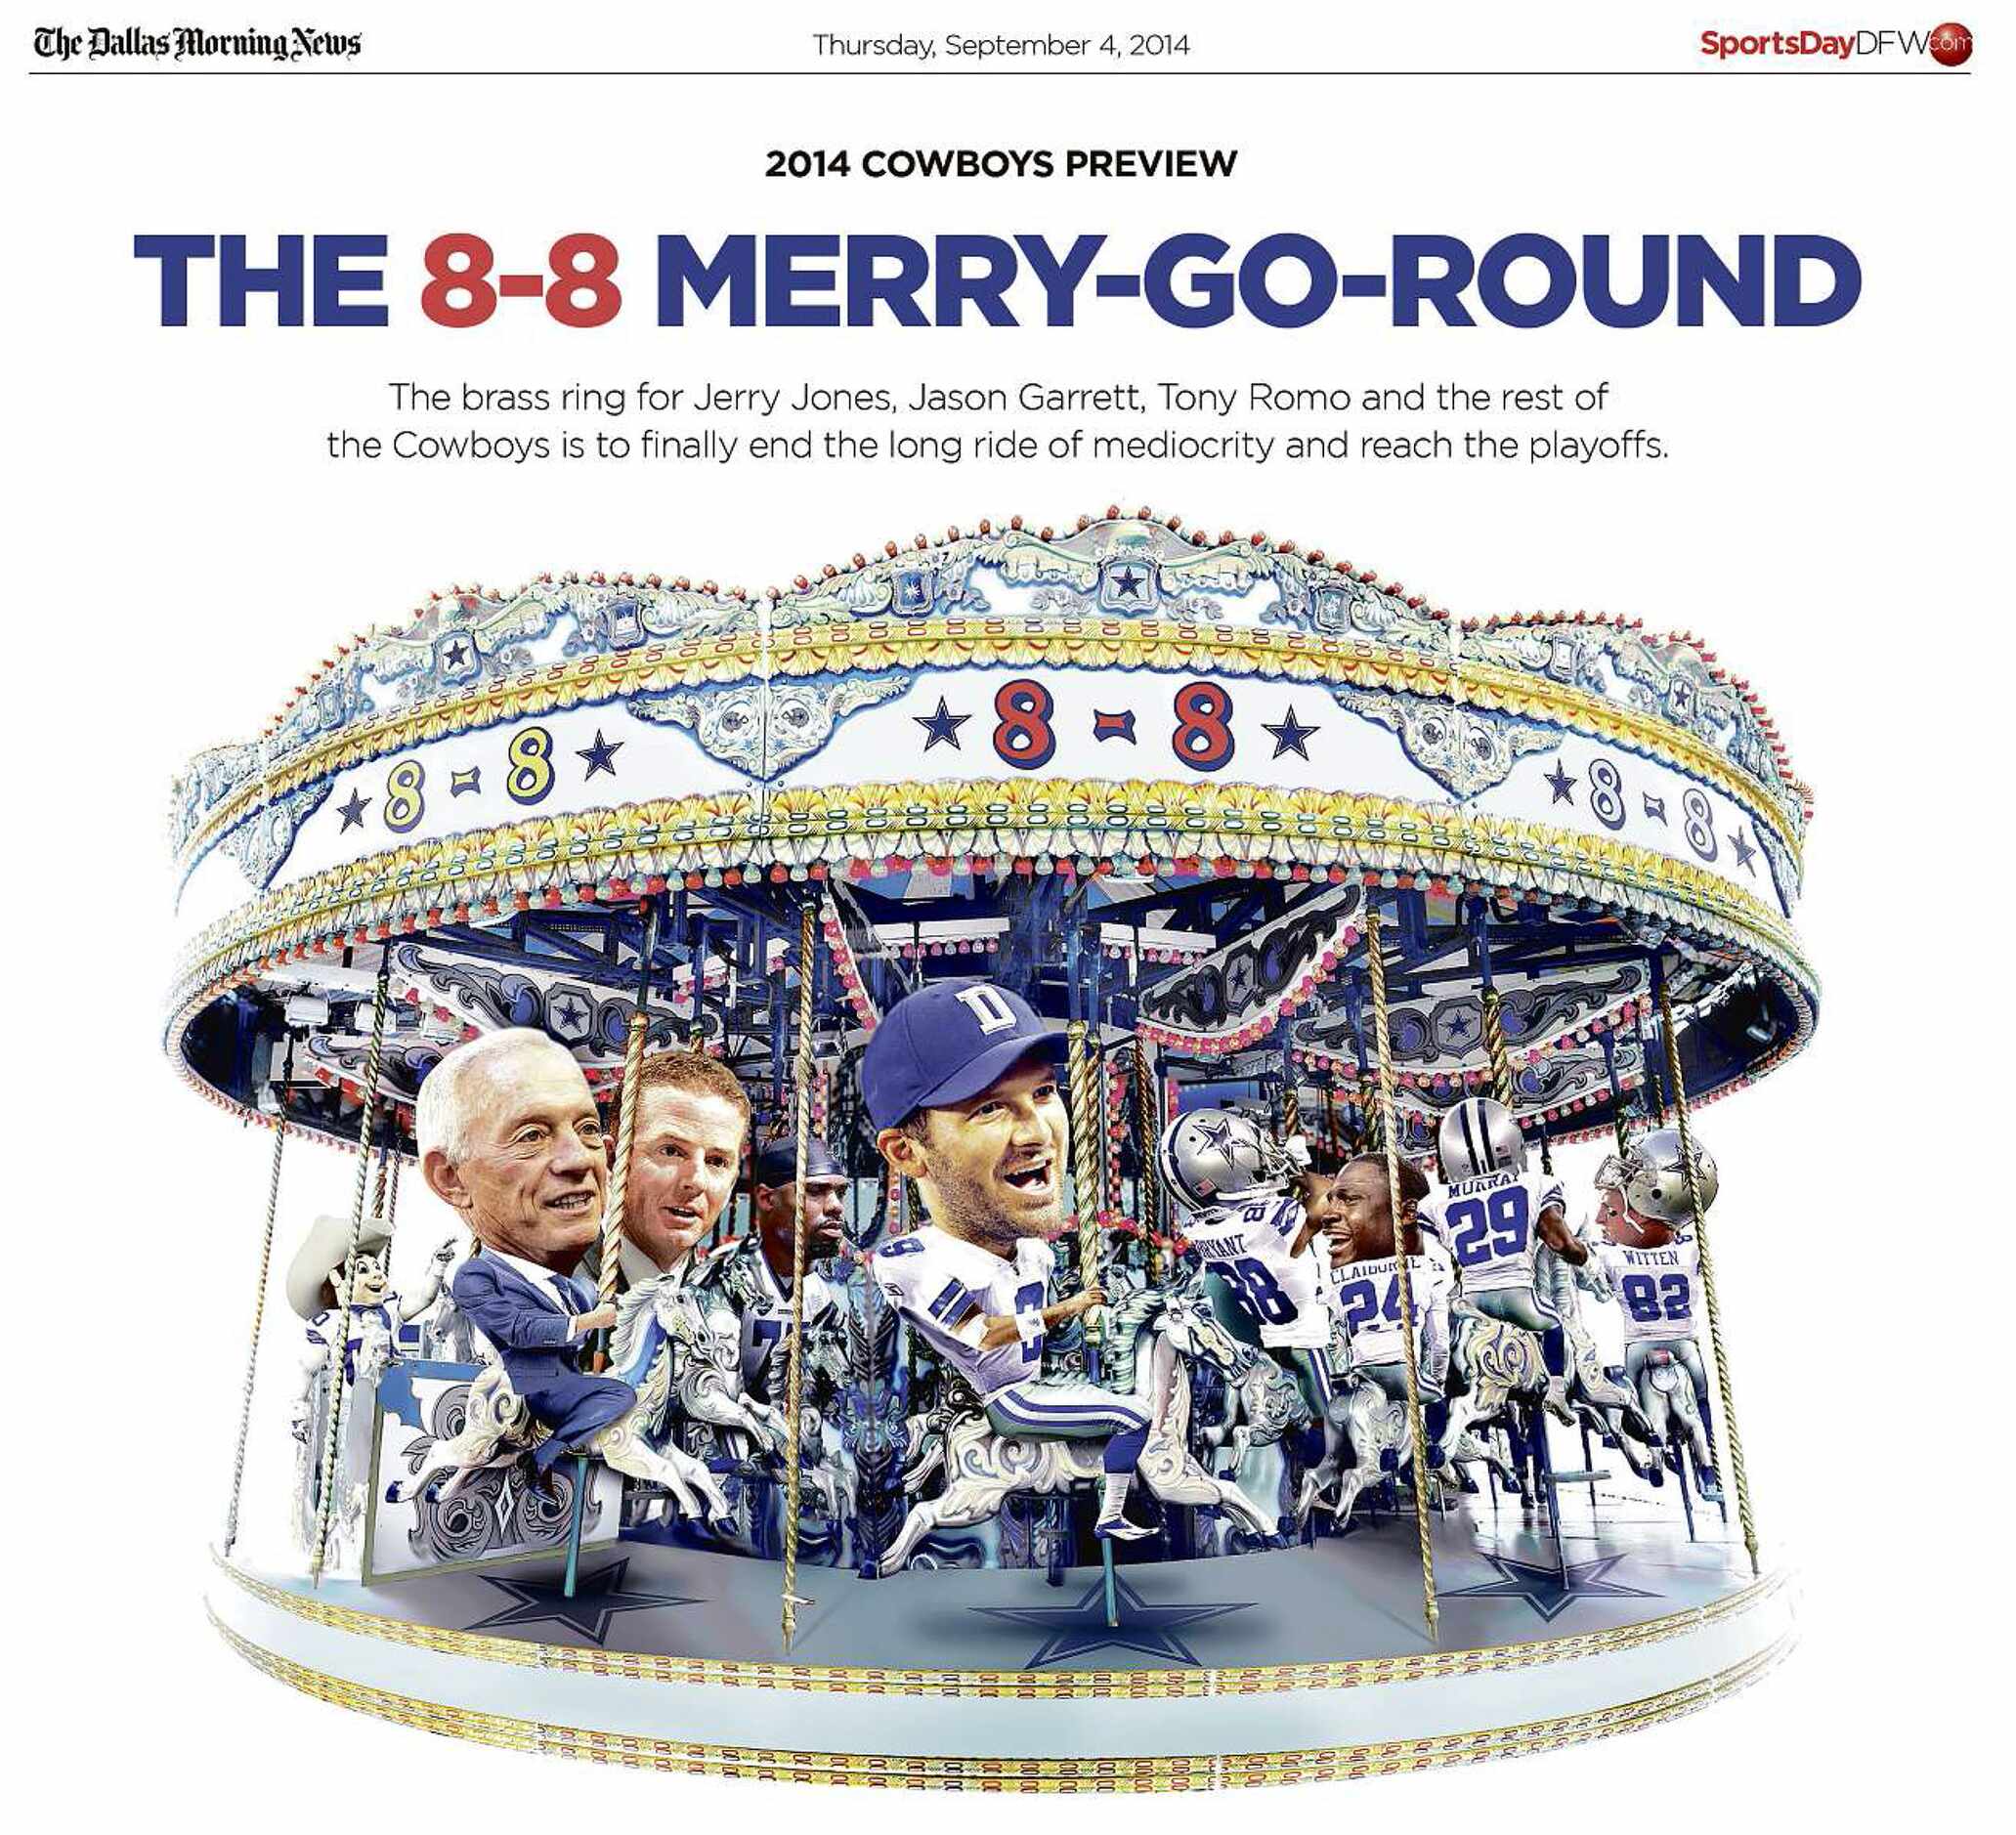 The cover of The Dallas Morning News' Cowboys preview section in 2014.